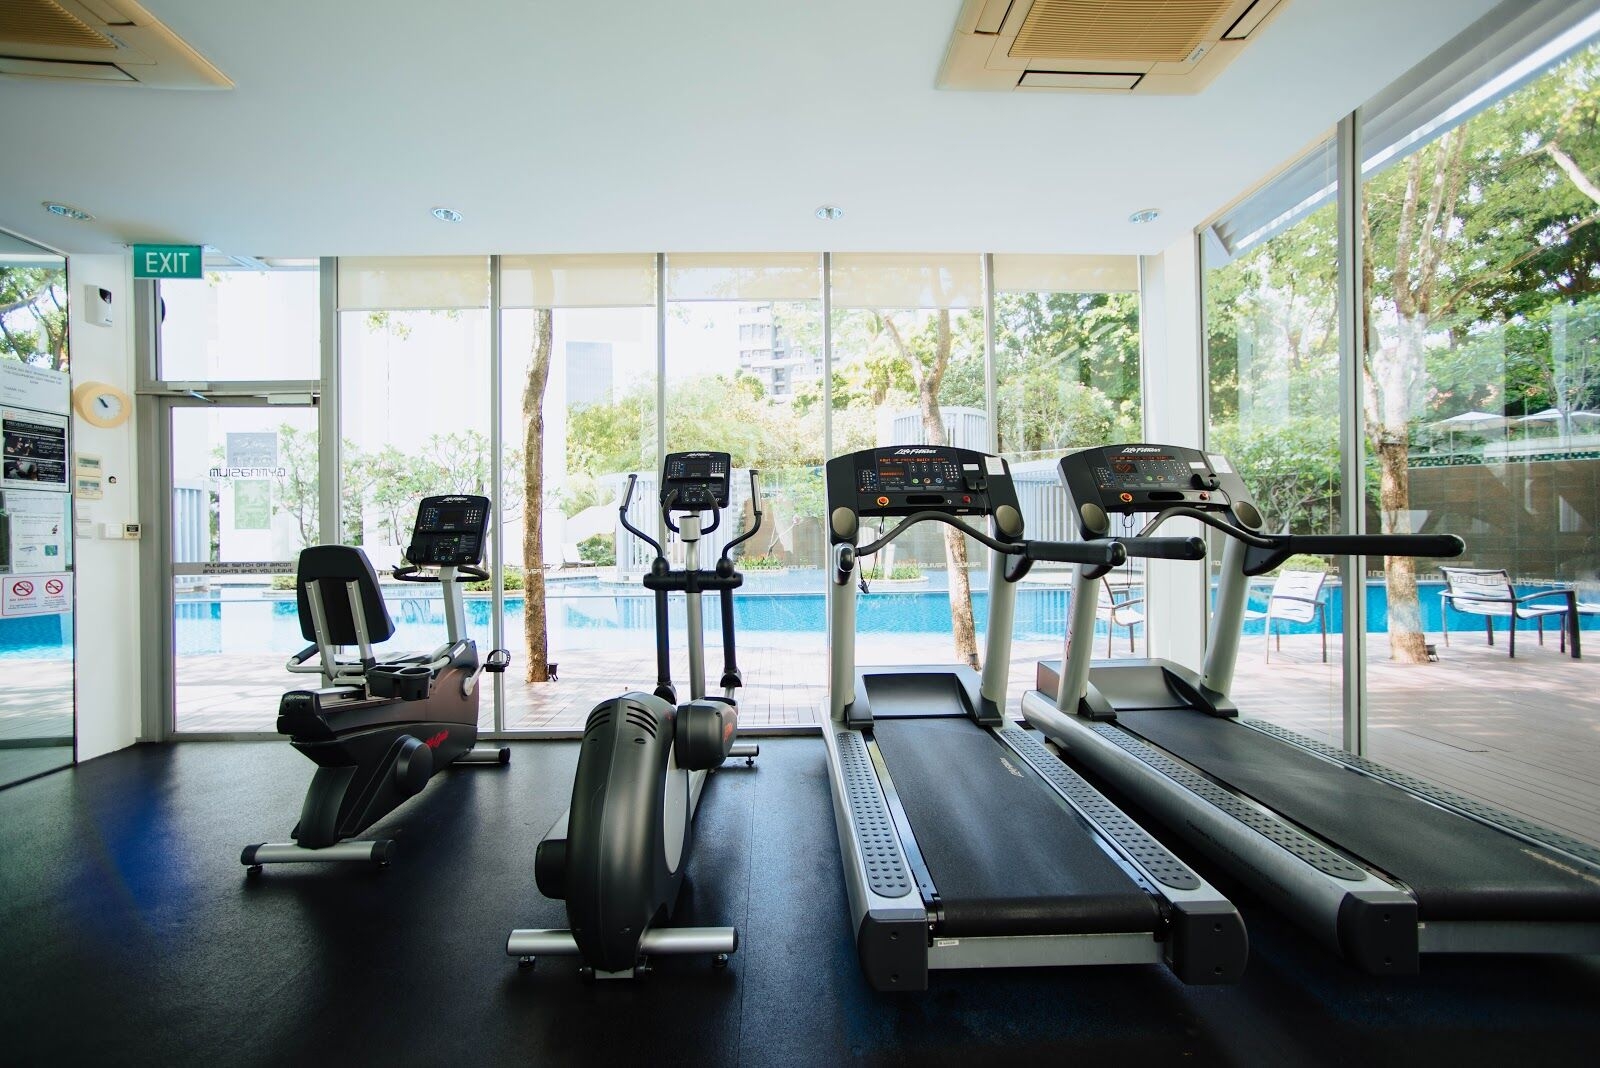 IoT Trends: How Will They Affect the Future of Gyms?